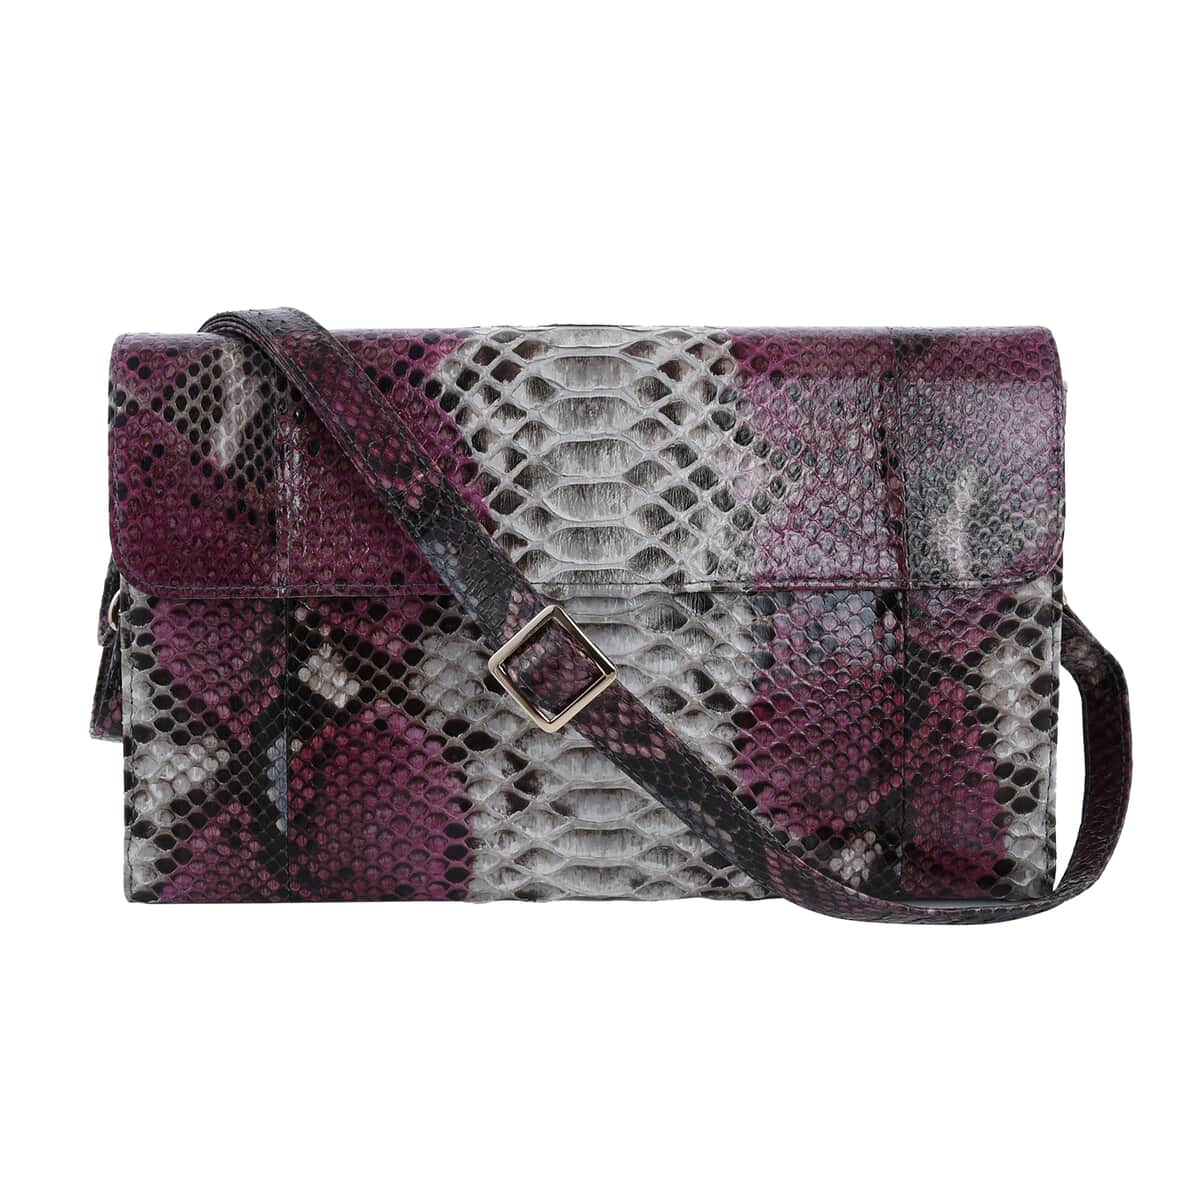 The Pelle Collection Multi Color Python Leather Evening Clutch Bag with Detachable Strap, Clutches for Women, Leather Handbag, Clutch Purse image number 0